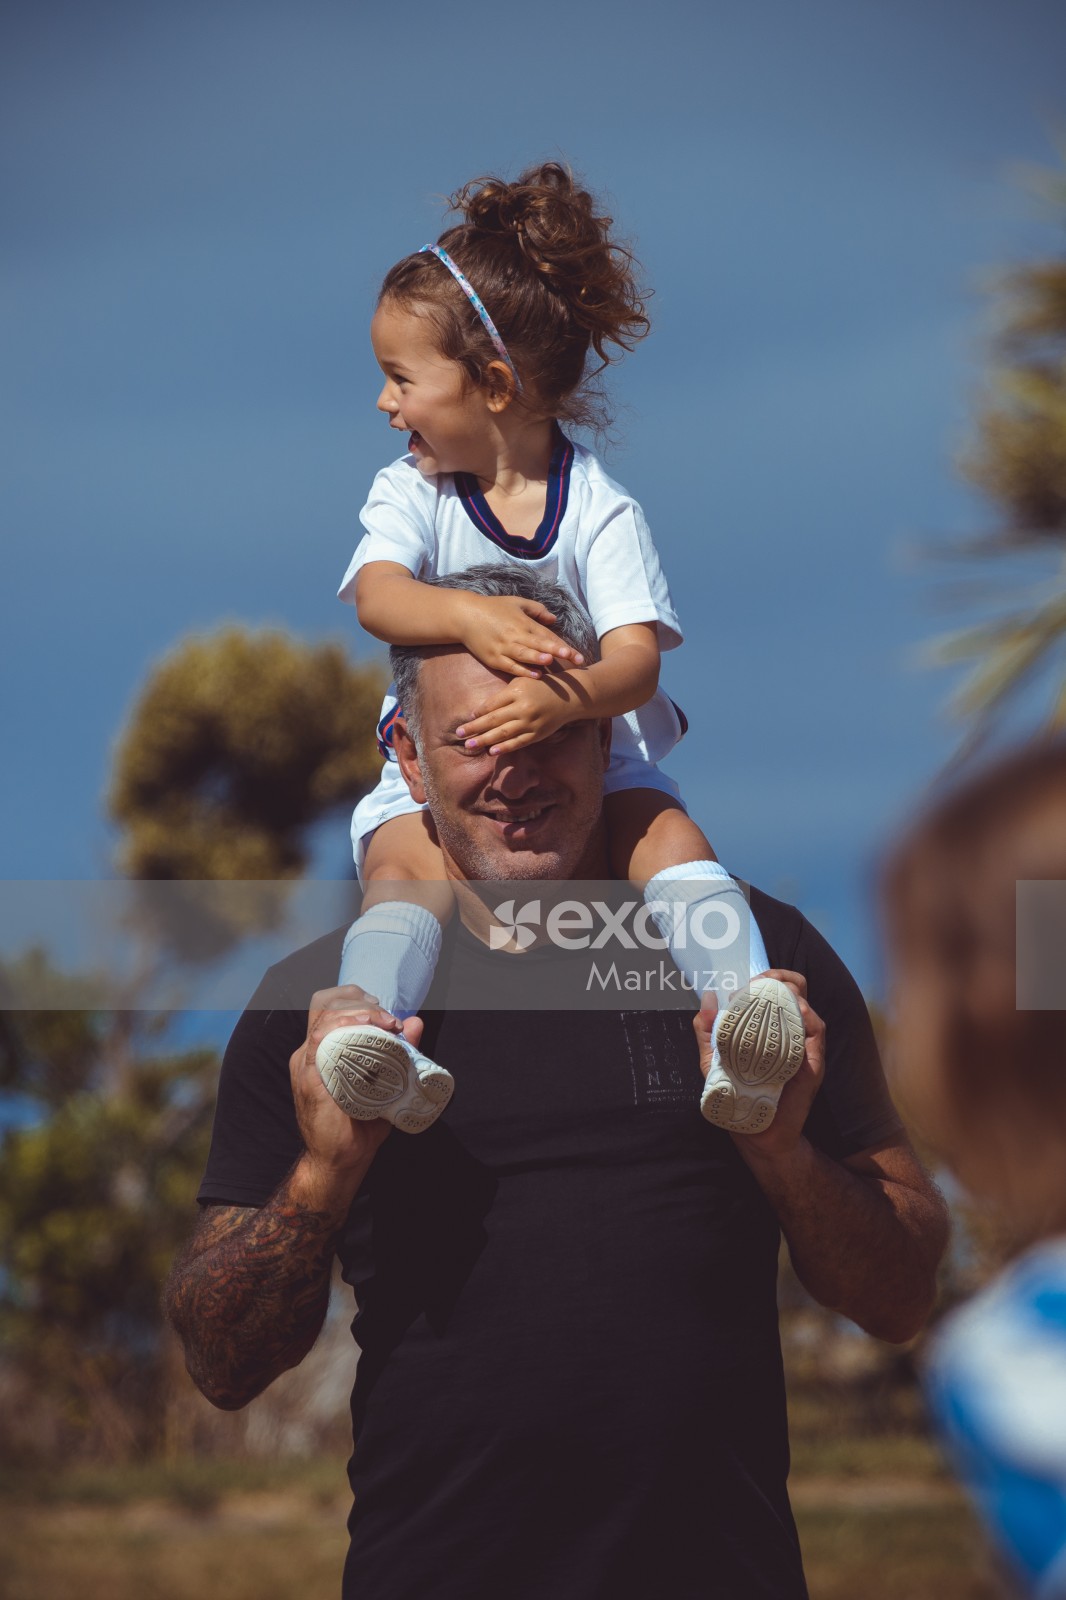 Daughter on dad's shoulders at Little Dribblers game